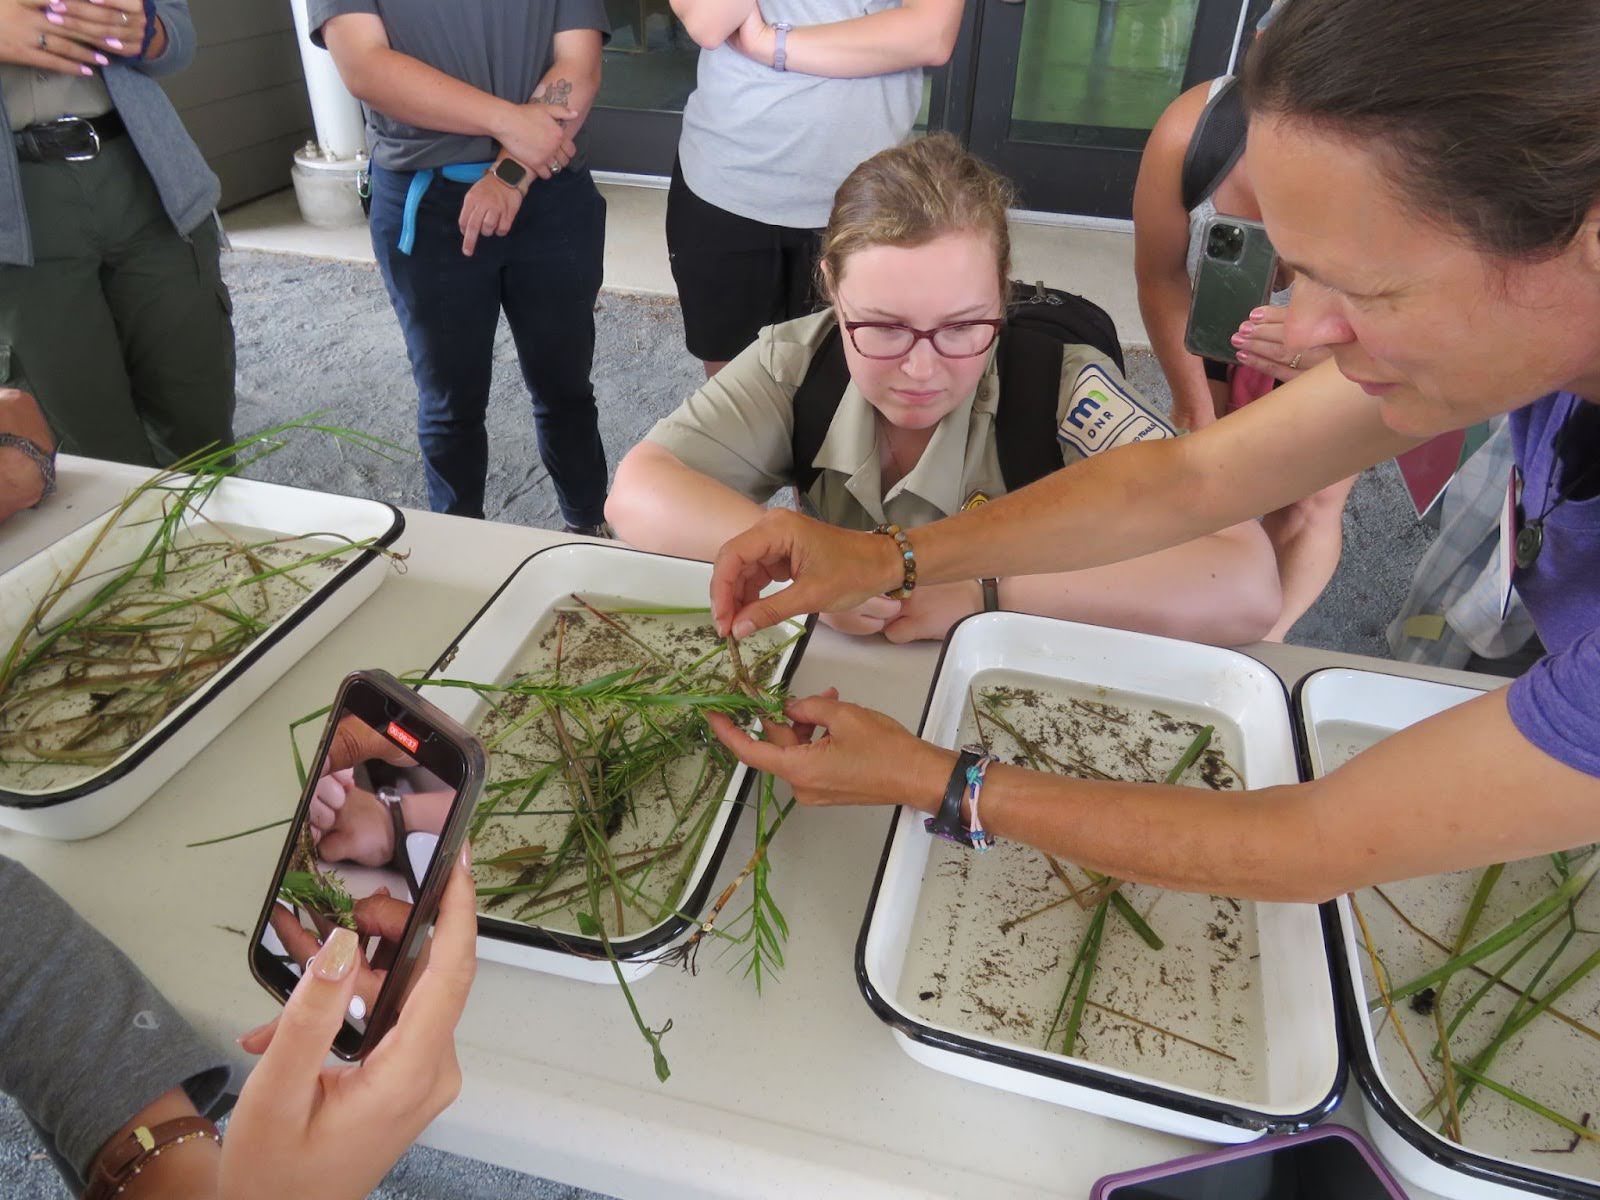 Emily Schilling shows the public dragonfly nymphs as part of a Nature of Science outreach event.